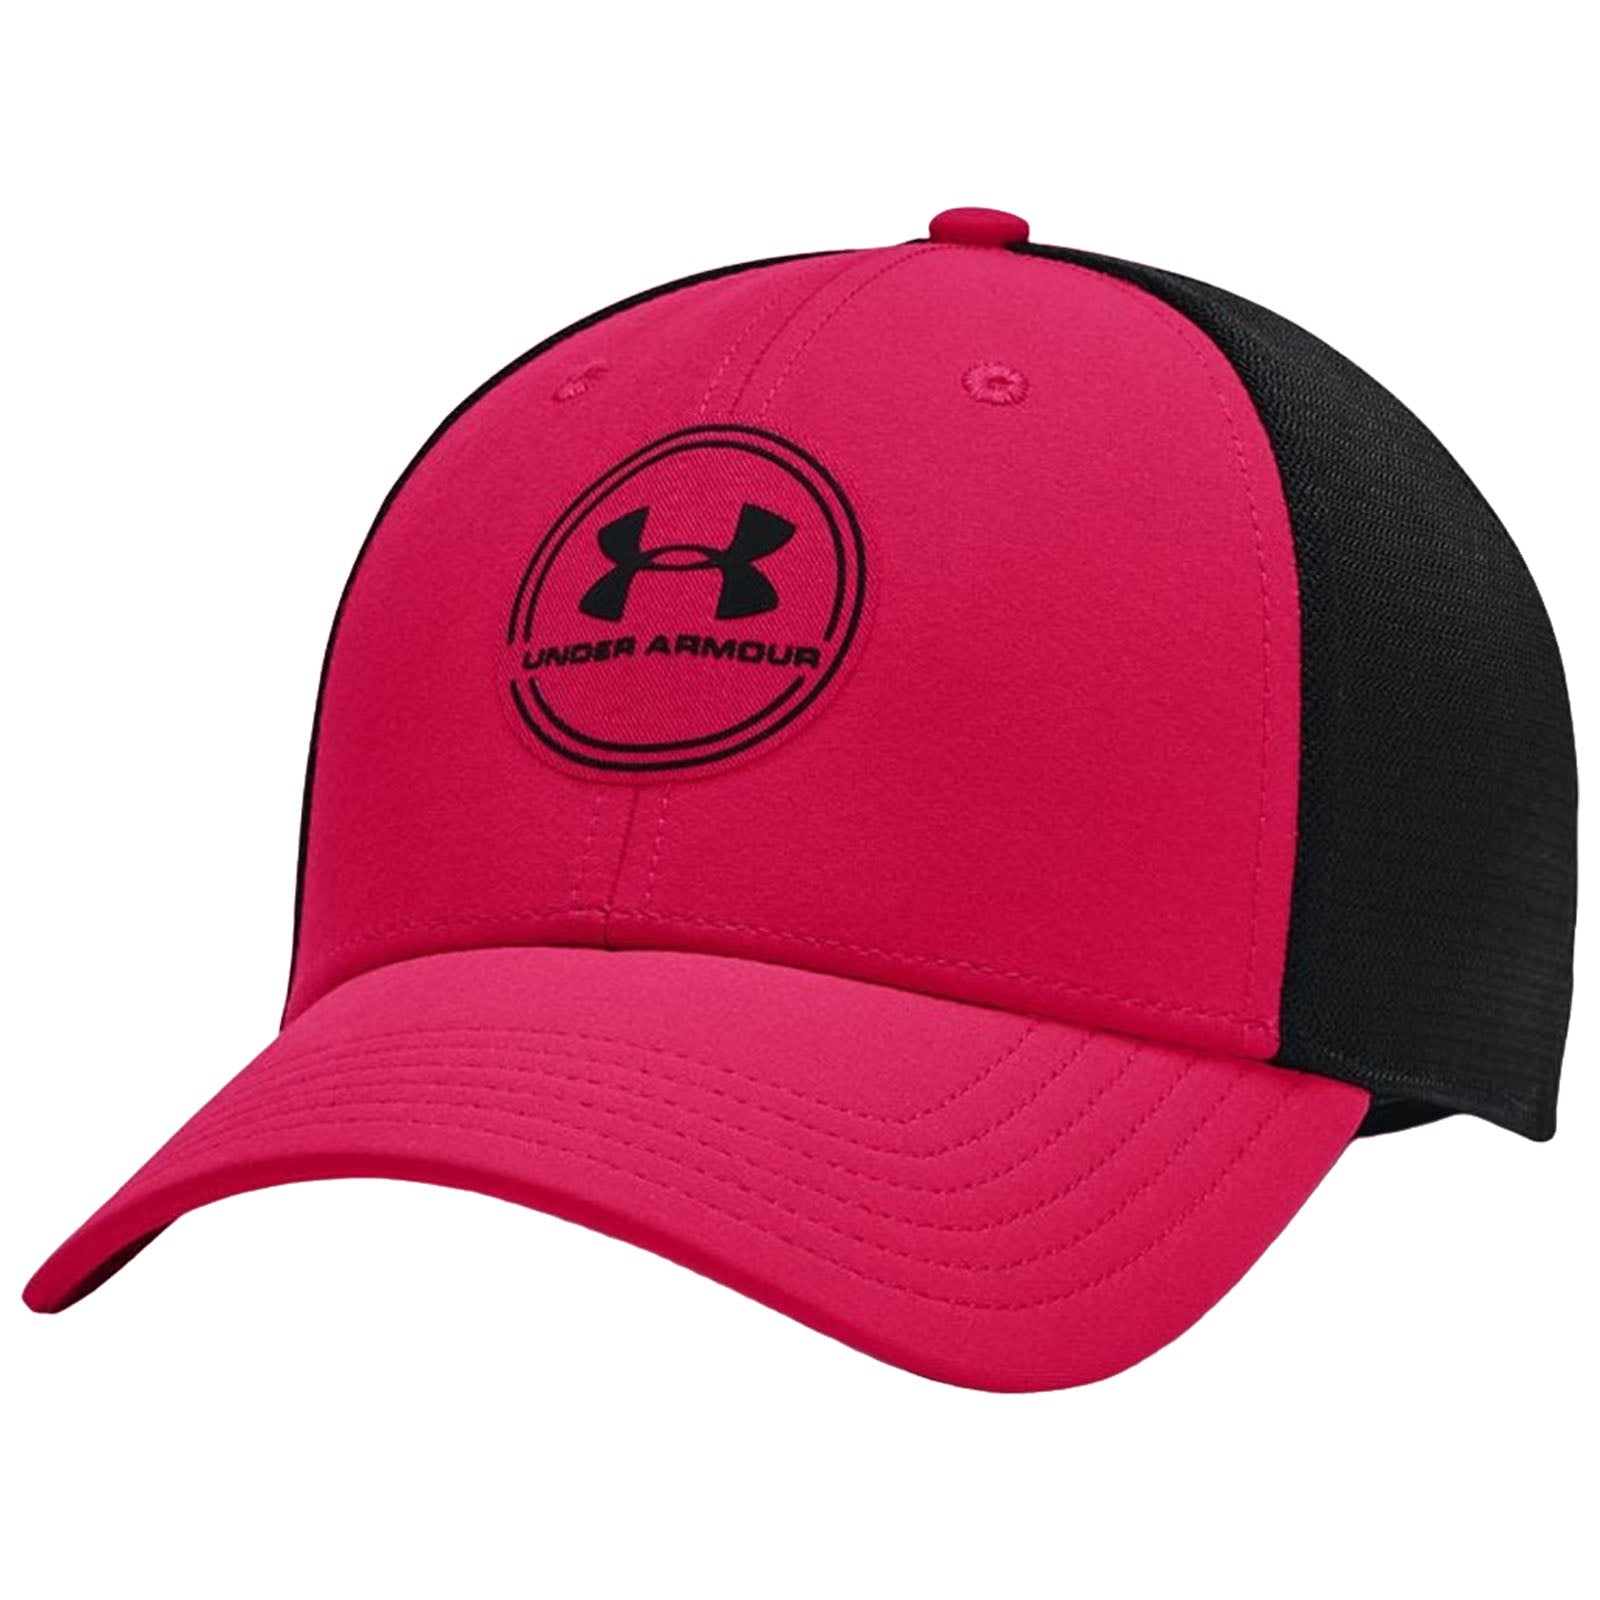 Under Armour Iso-Chill Driver Mesh Cap - Black